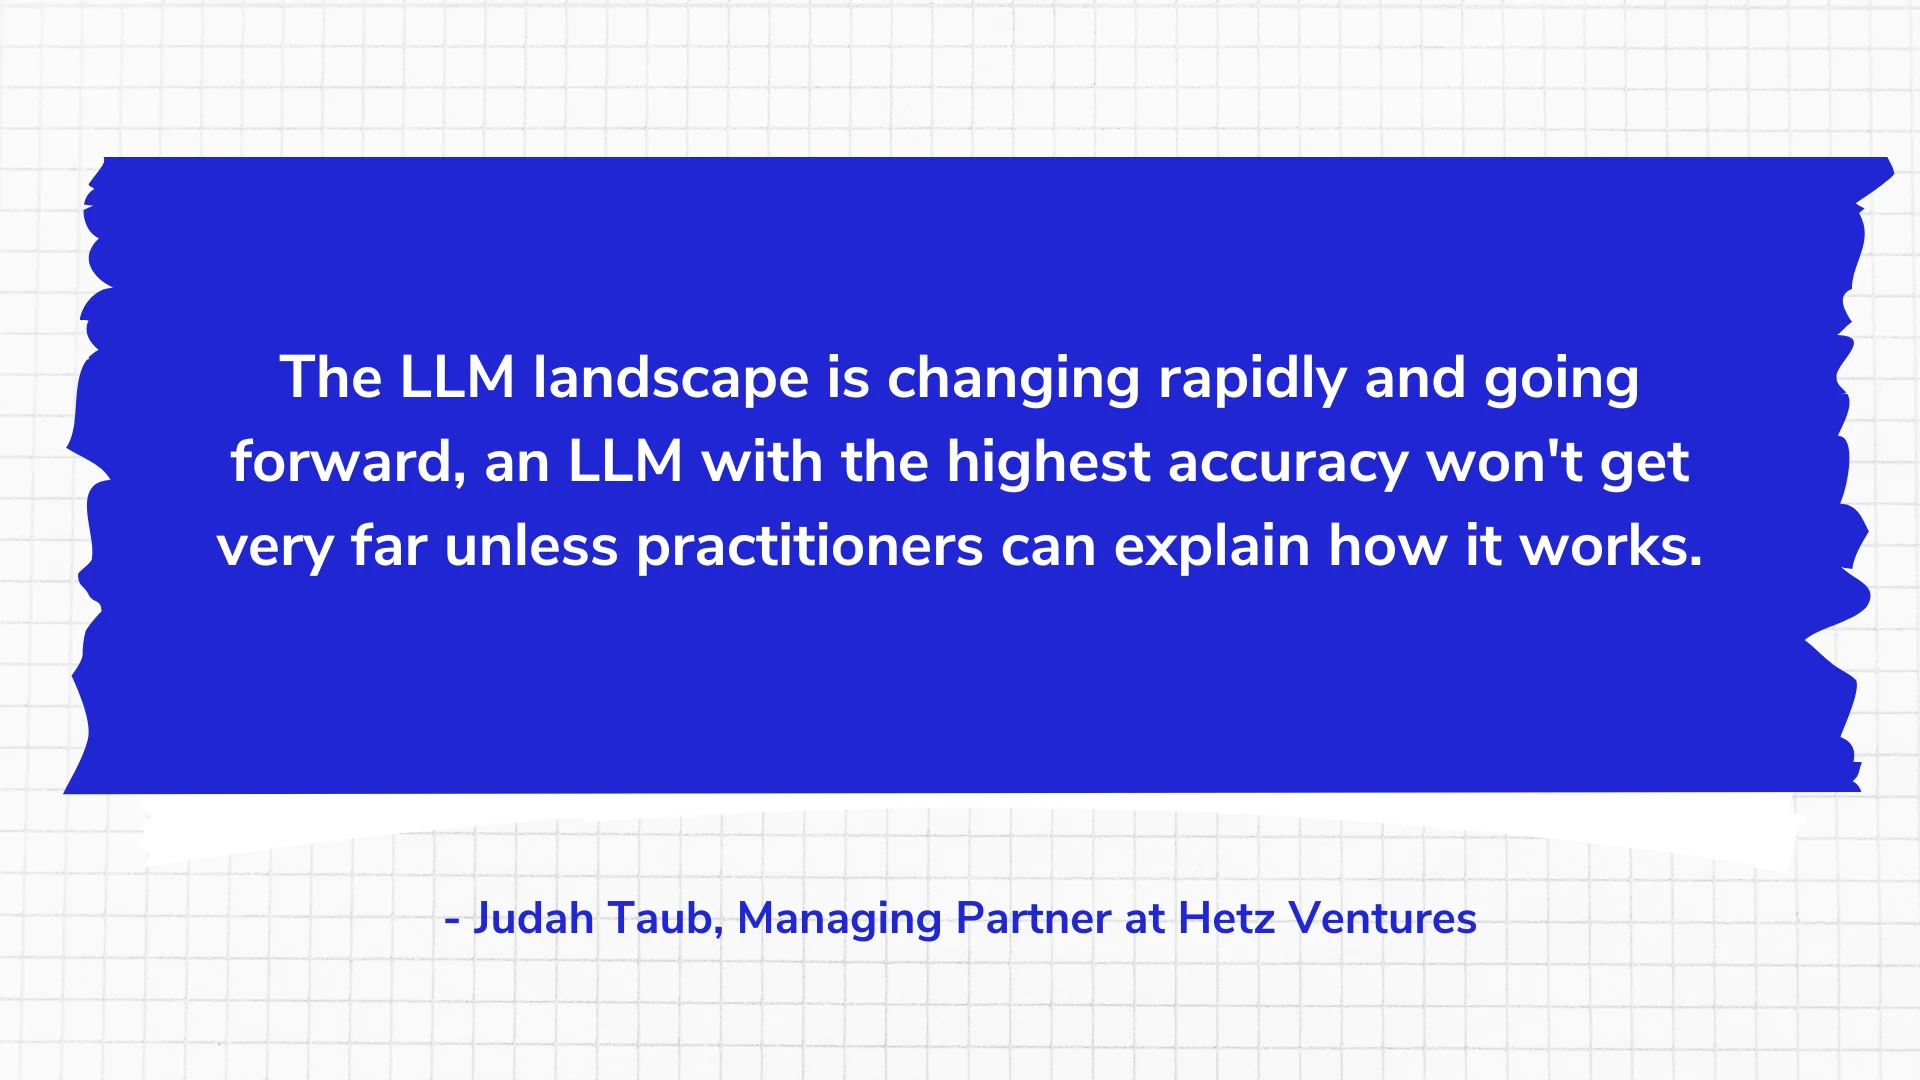 The LLM landscape is changing rapidly and going forward